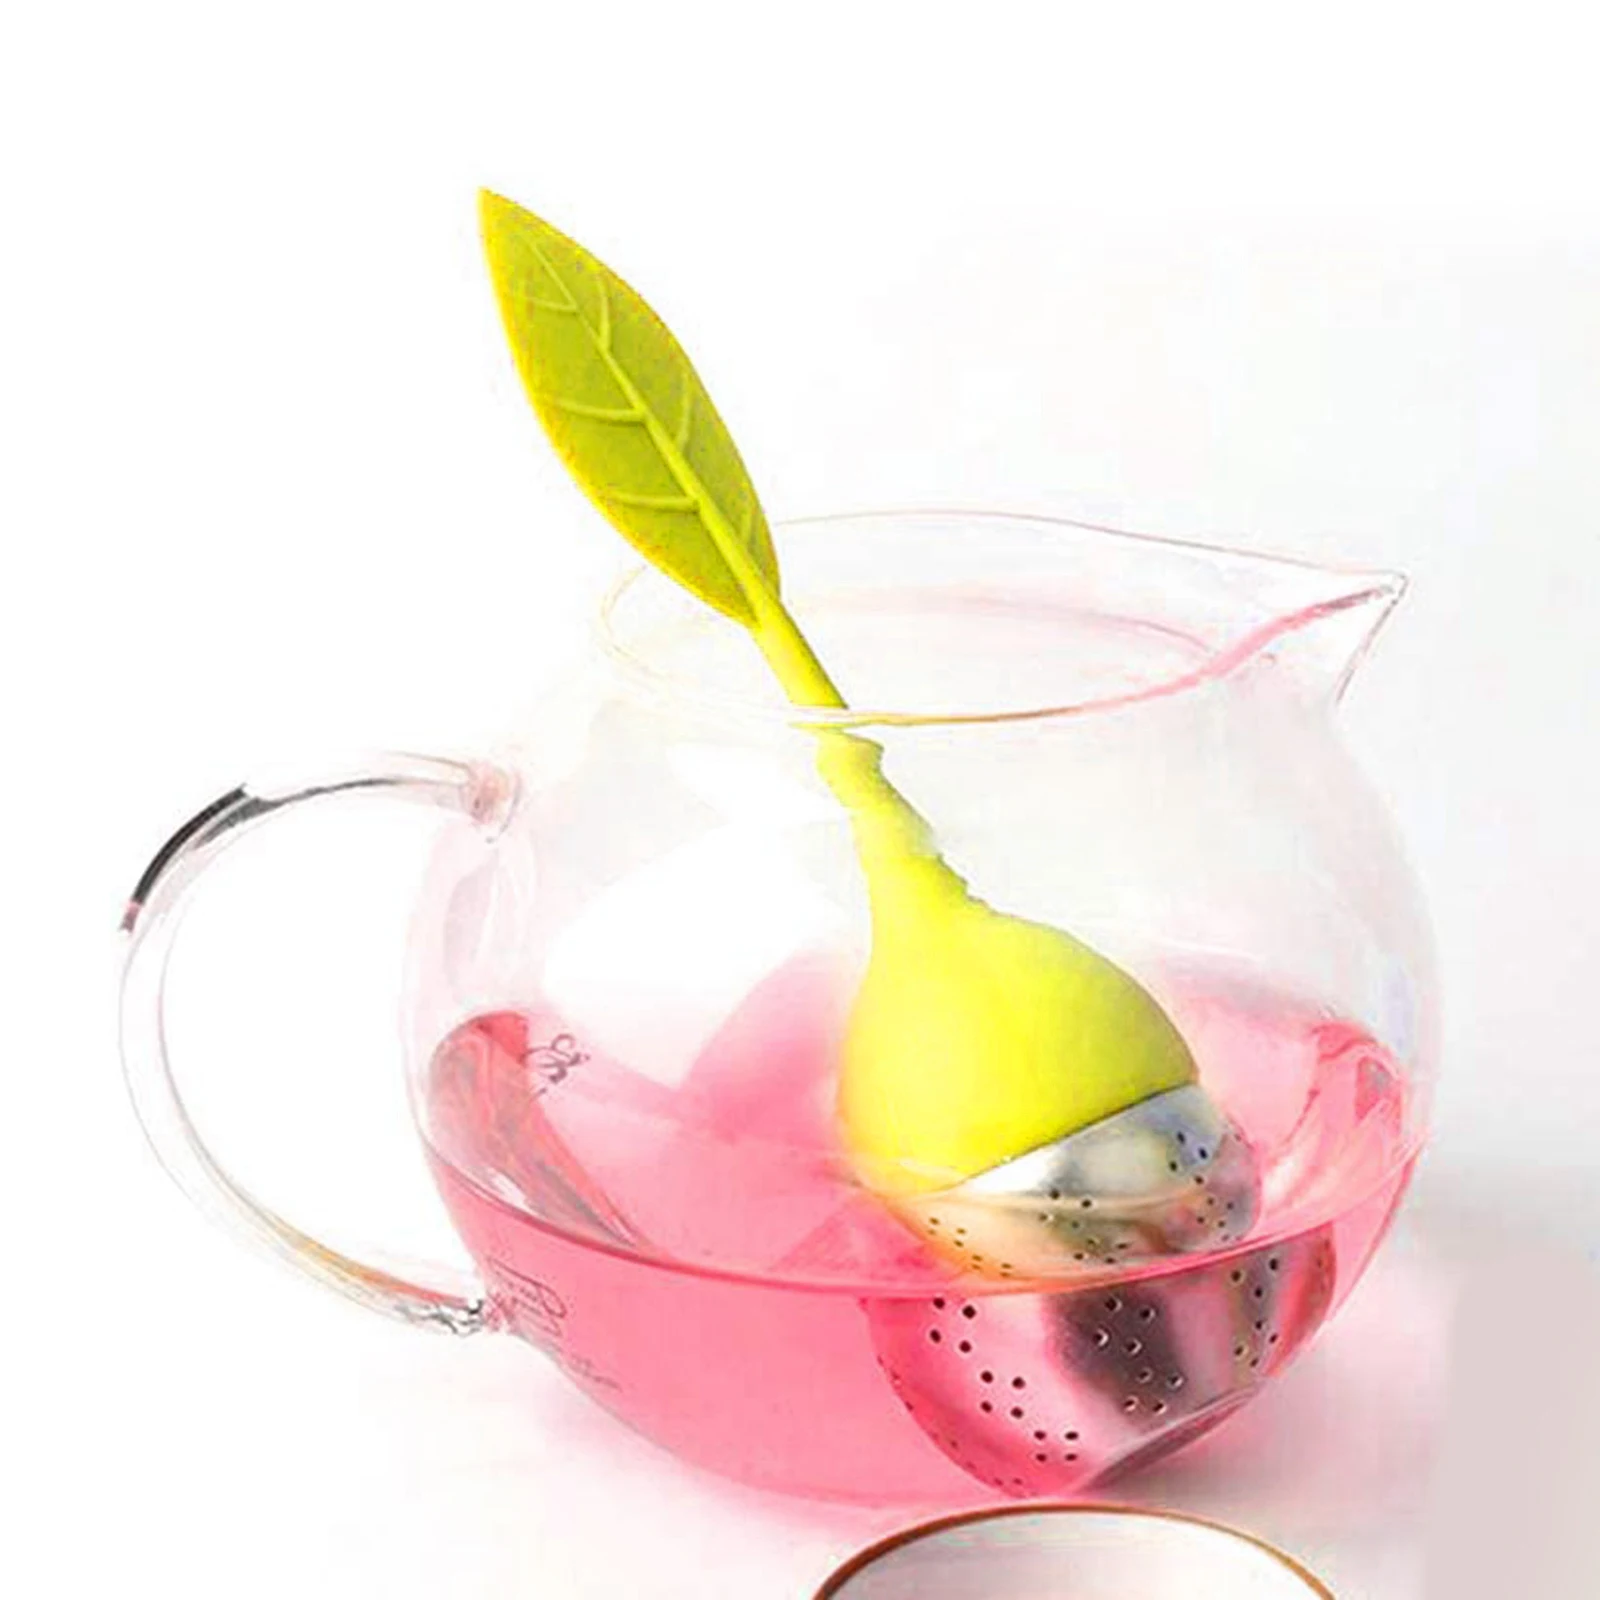 Household Tea Infuser Silicone Tea Strainer Silicone Tea Strainer r with Drip Tray Tea Balls Tea Strainers